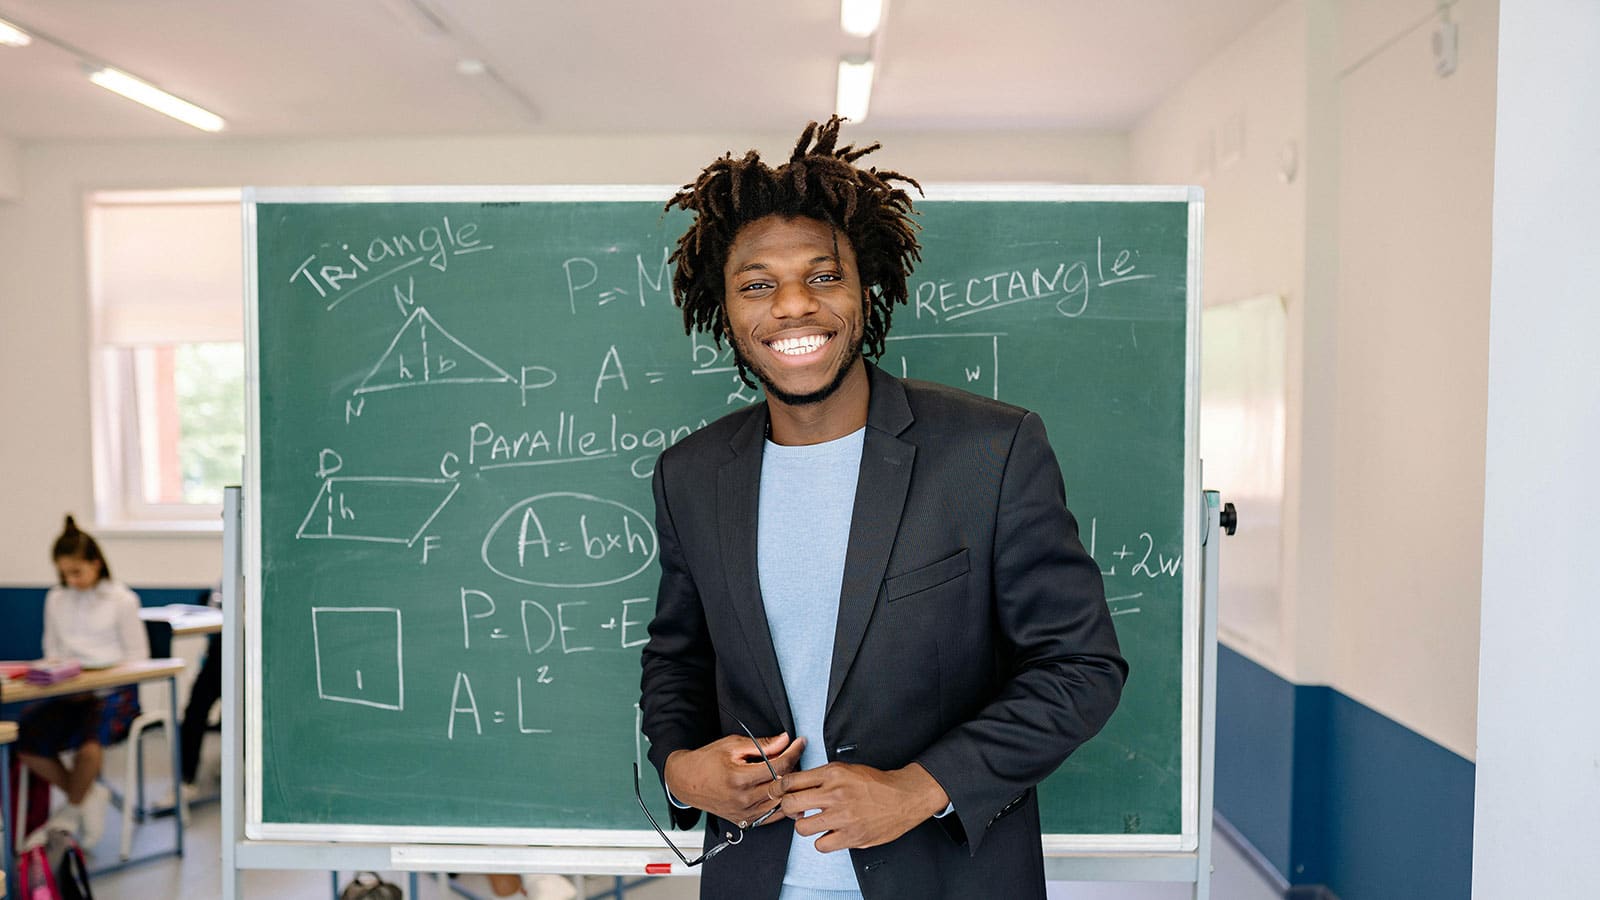 Student standing in front of a green chalkboard smiling